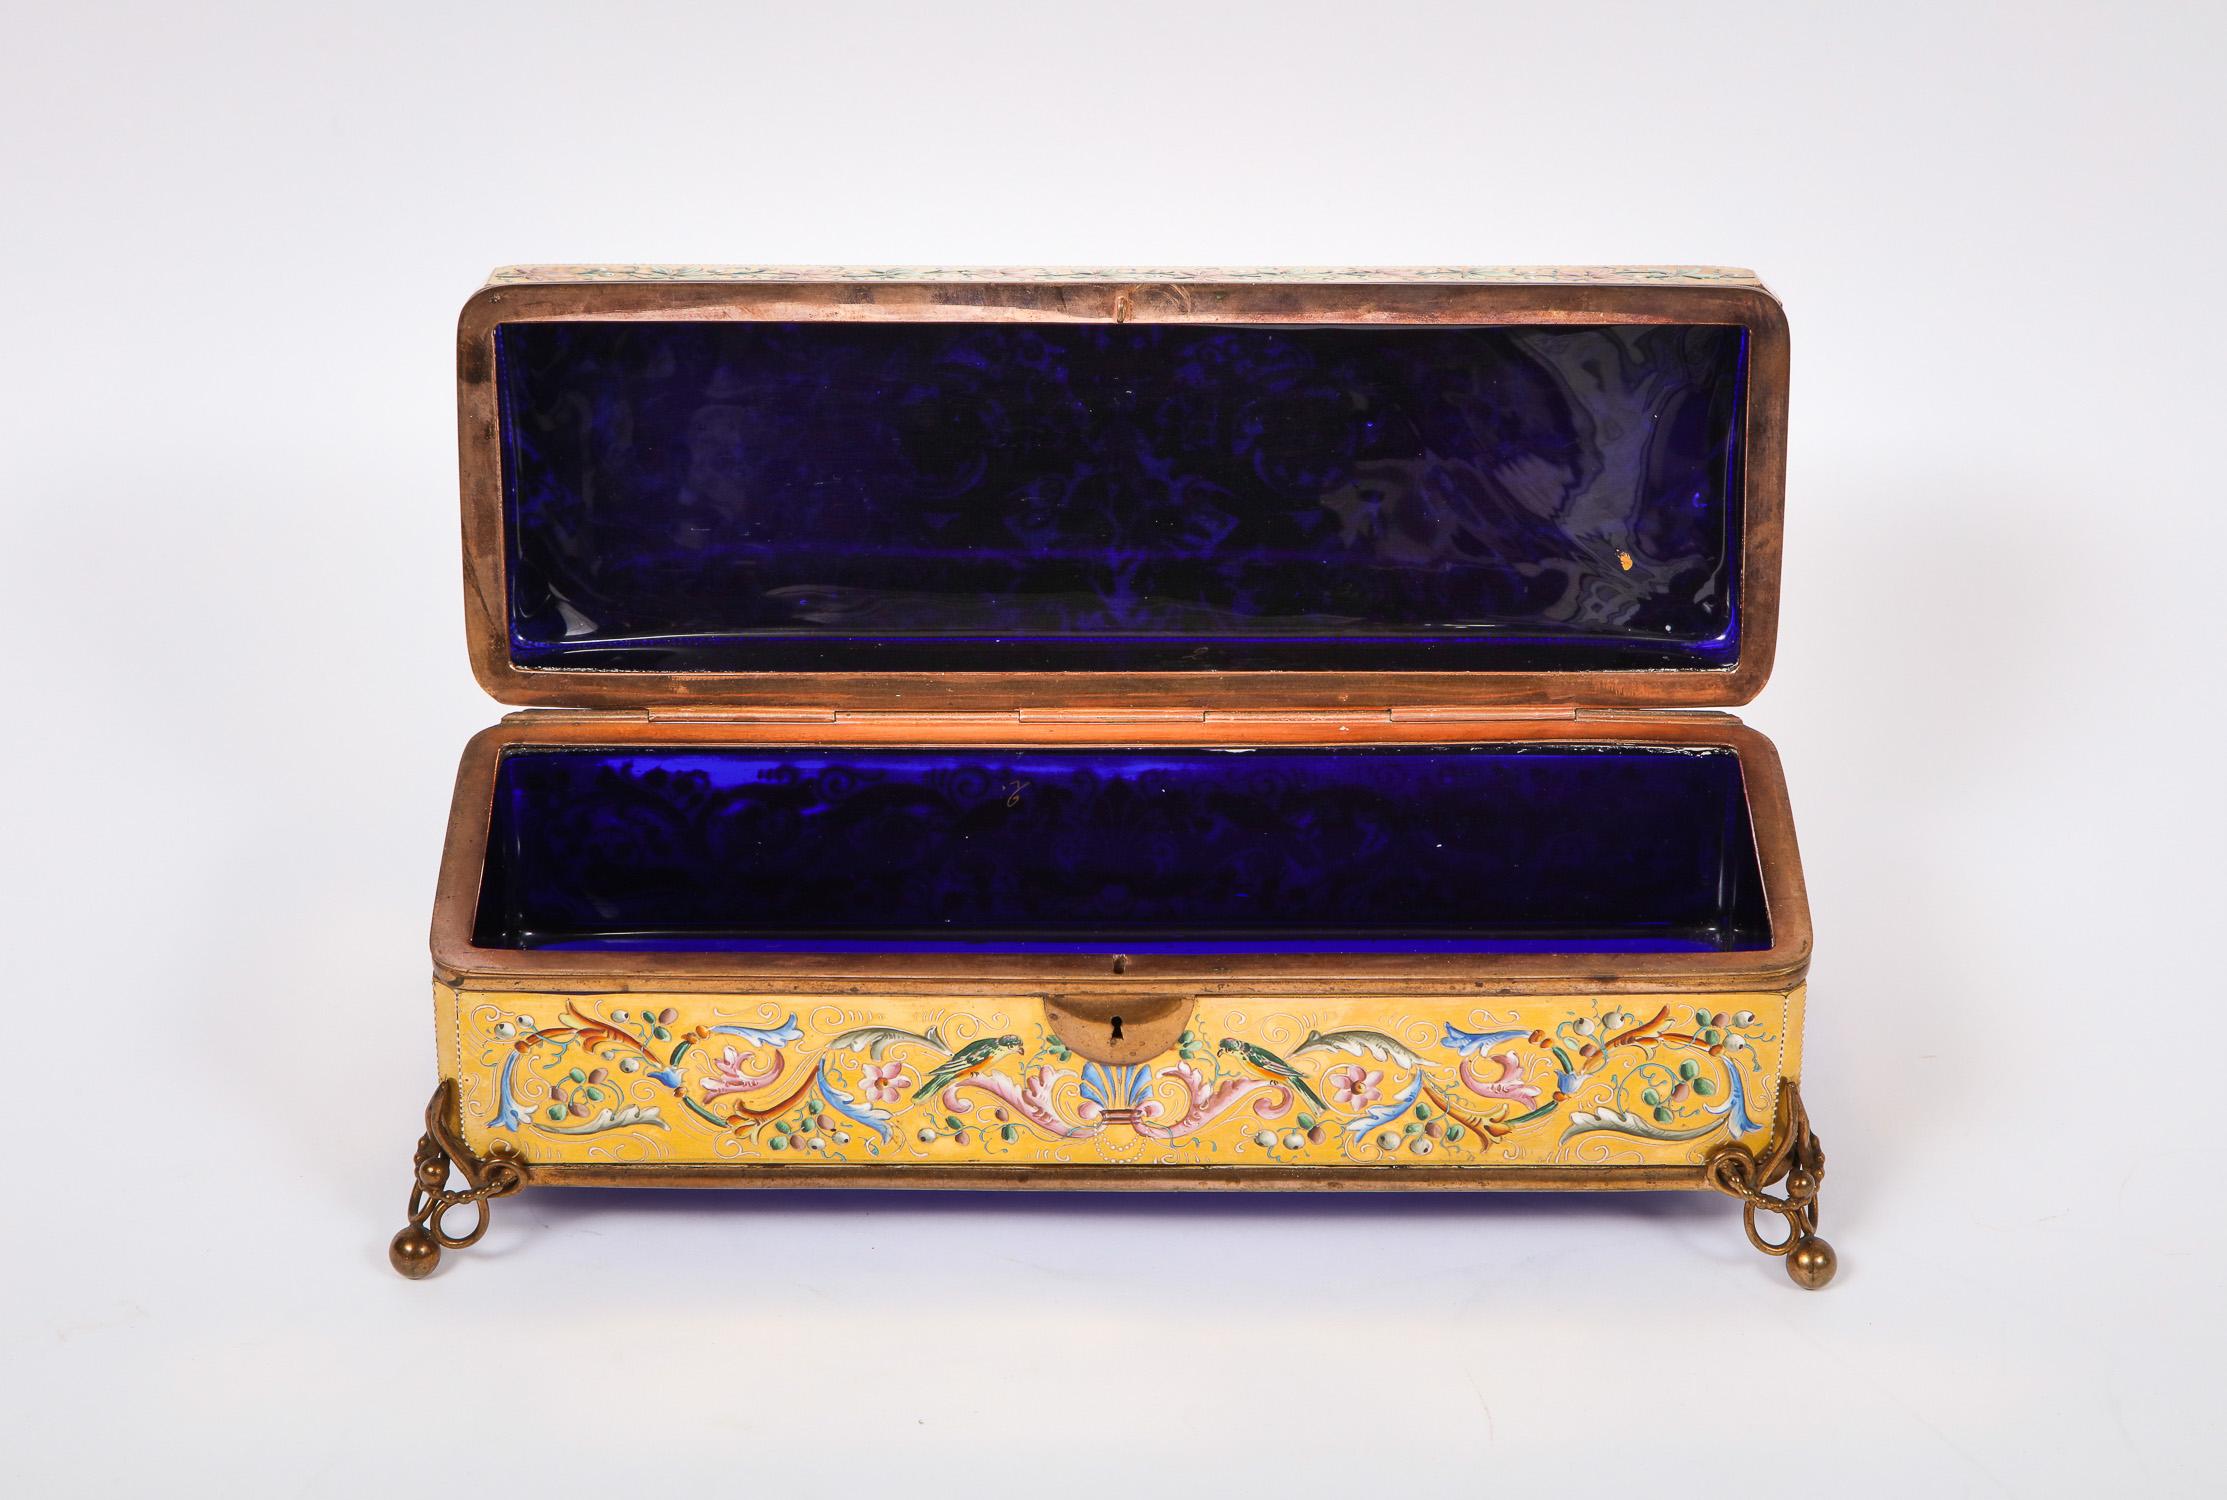 Late 19th Century Blue Moser Crystal and Enameled Box Made for the Islamic or Moorish Market For Sale